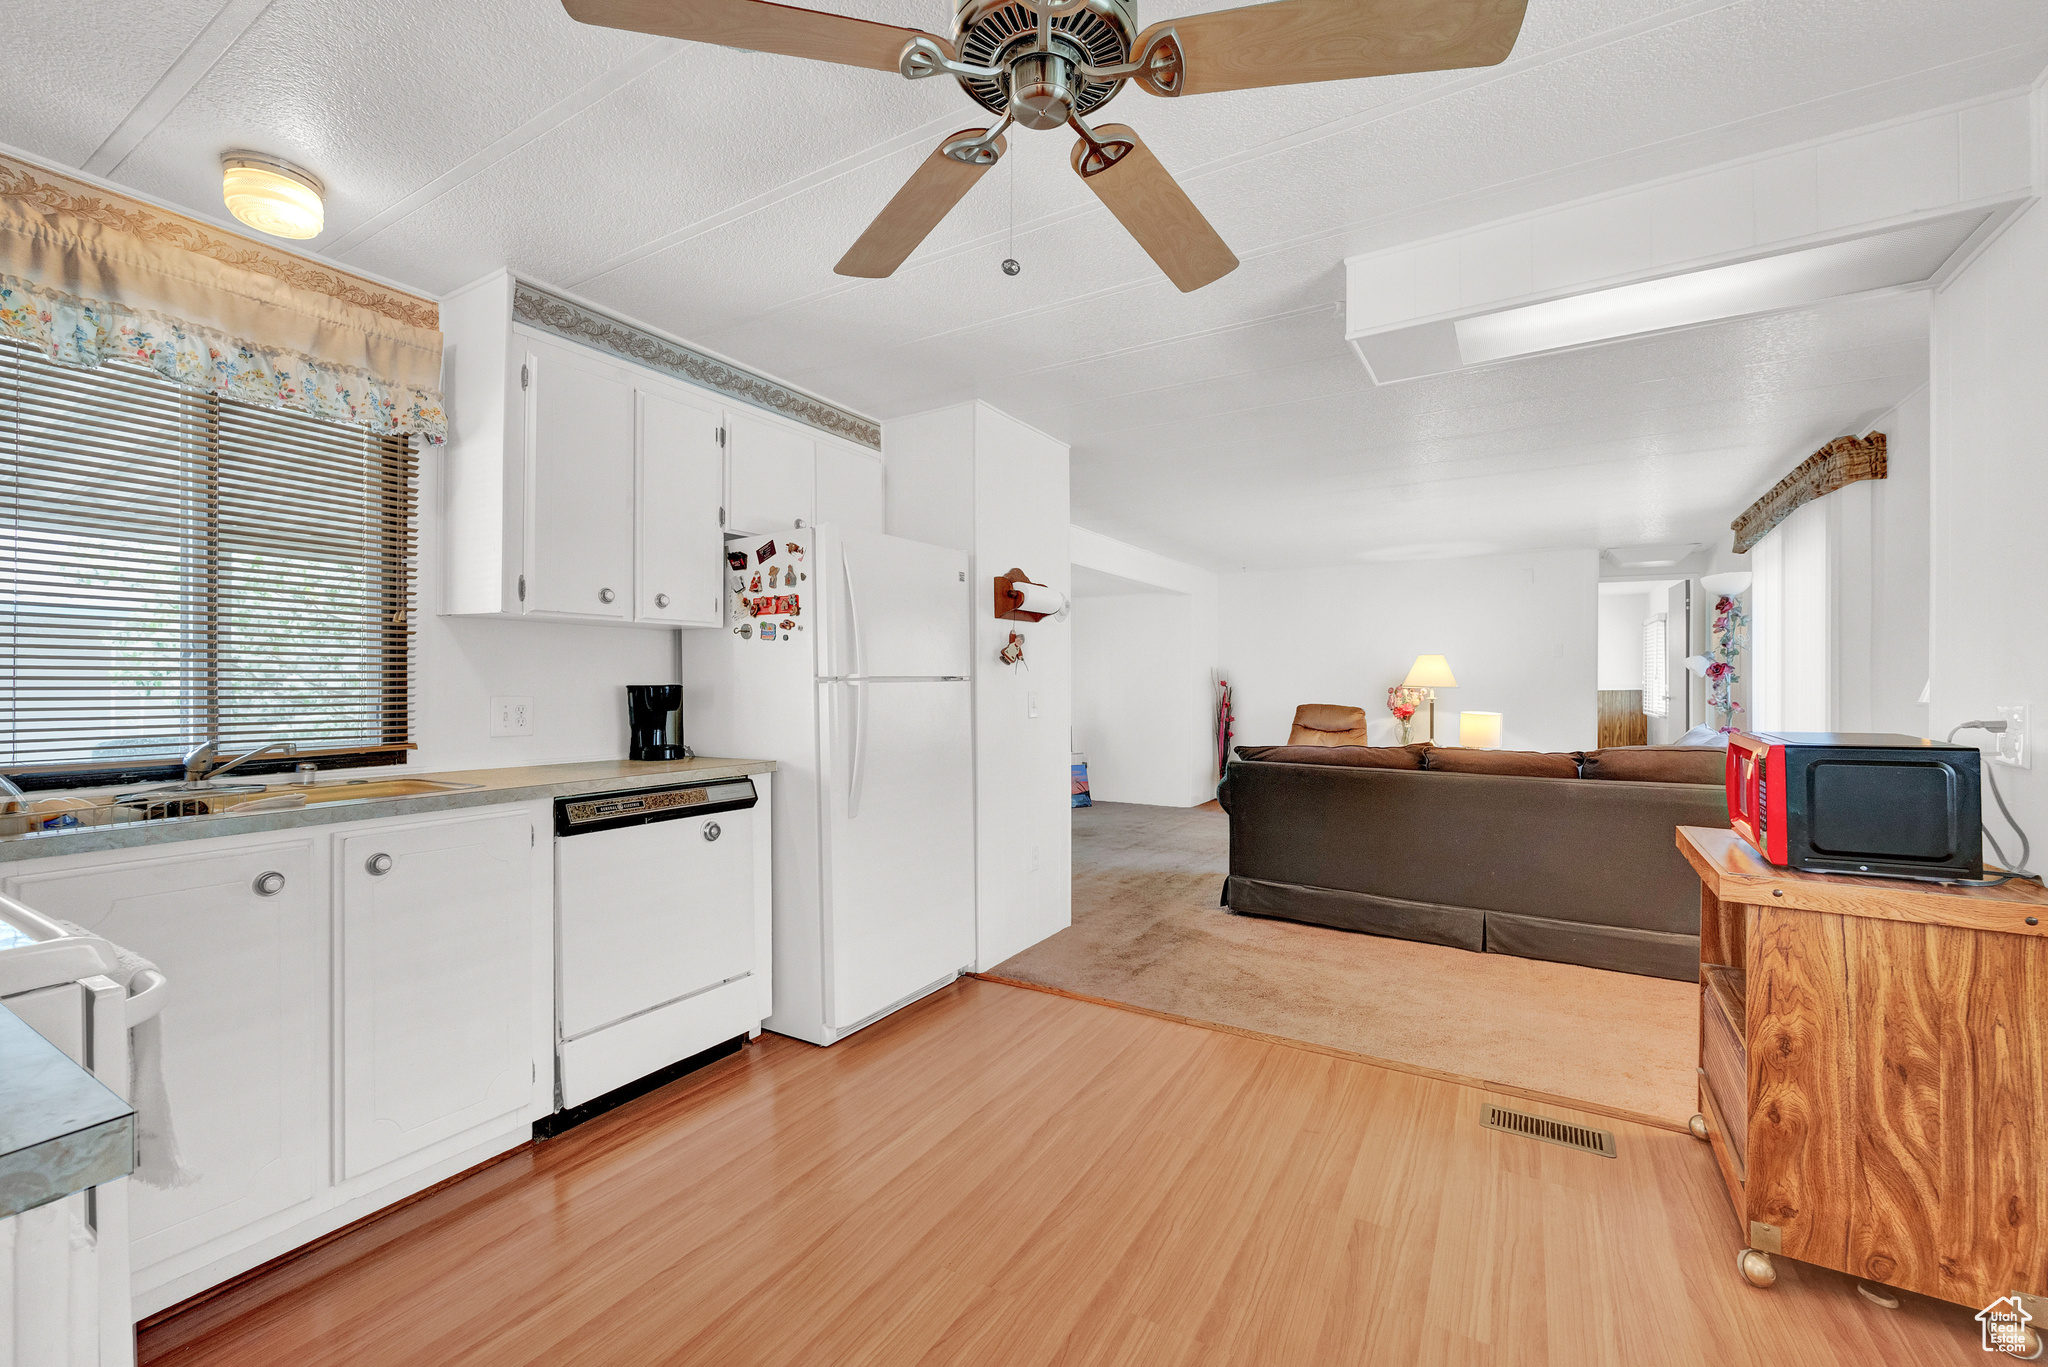 Kitchen featuring ceiling fan, sink, white appliances, white cabinetry, and light colored carpet